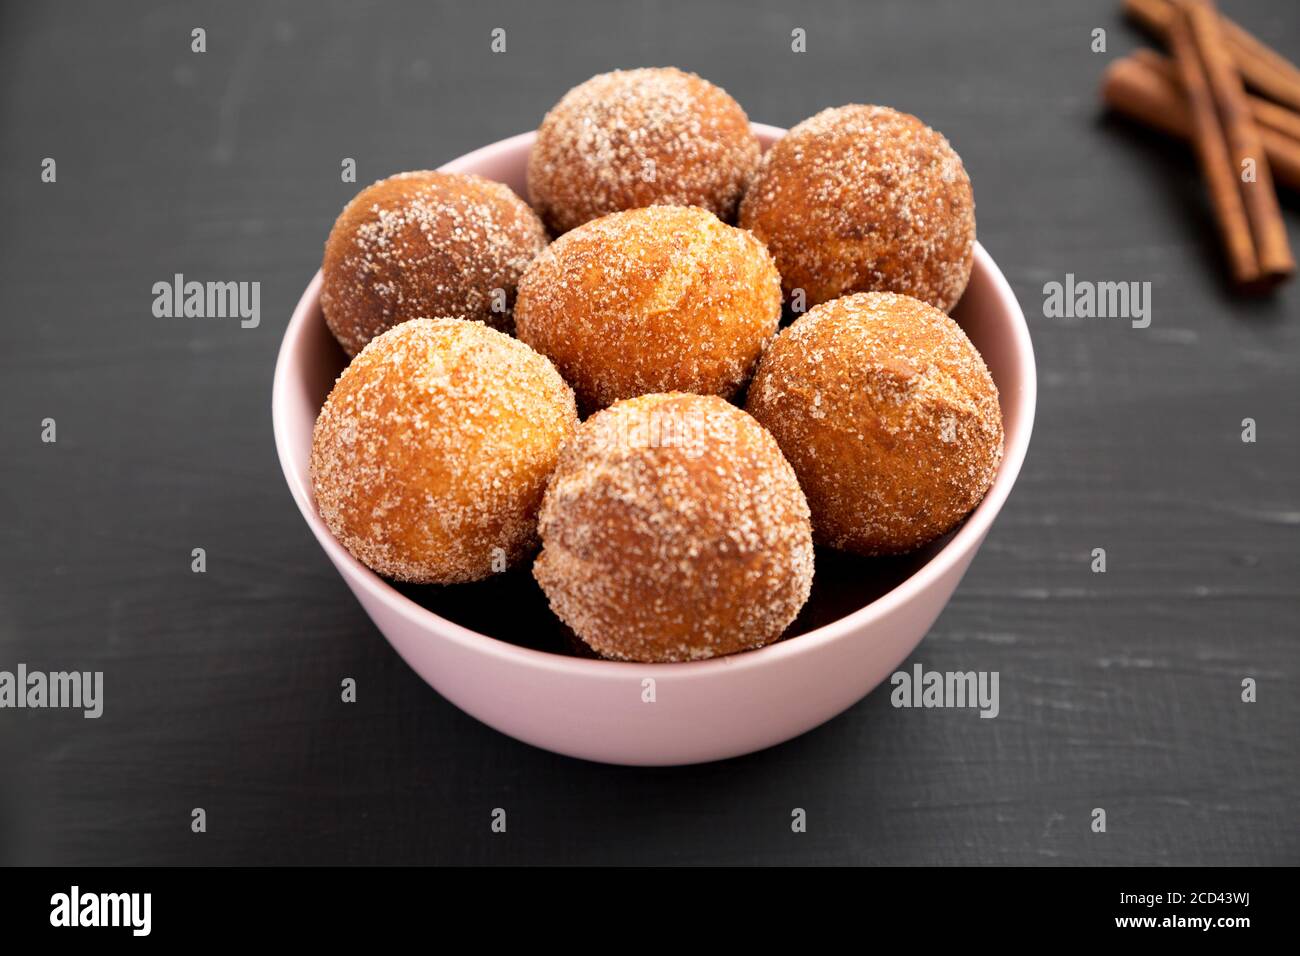 Homemade Fried Donut Holes in a pink bowl on a black surface, side view. Stock Photo